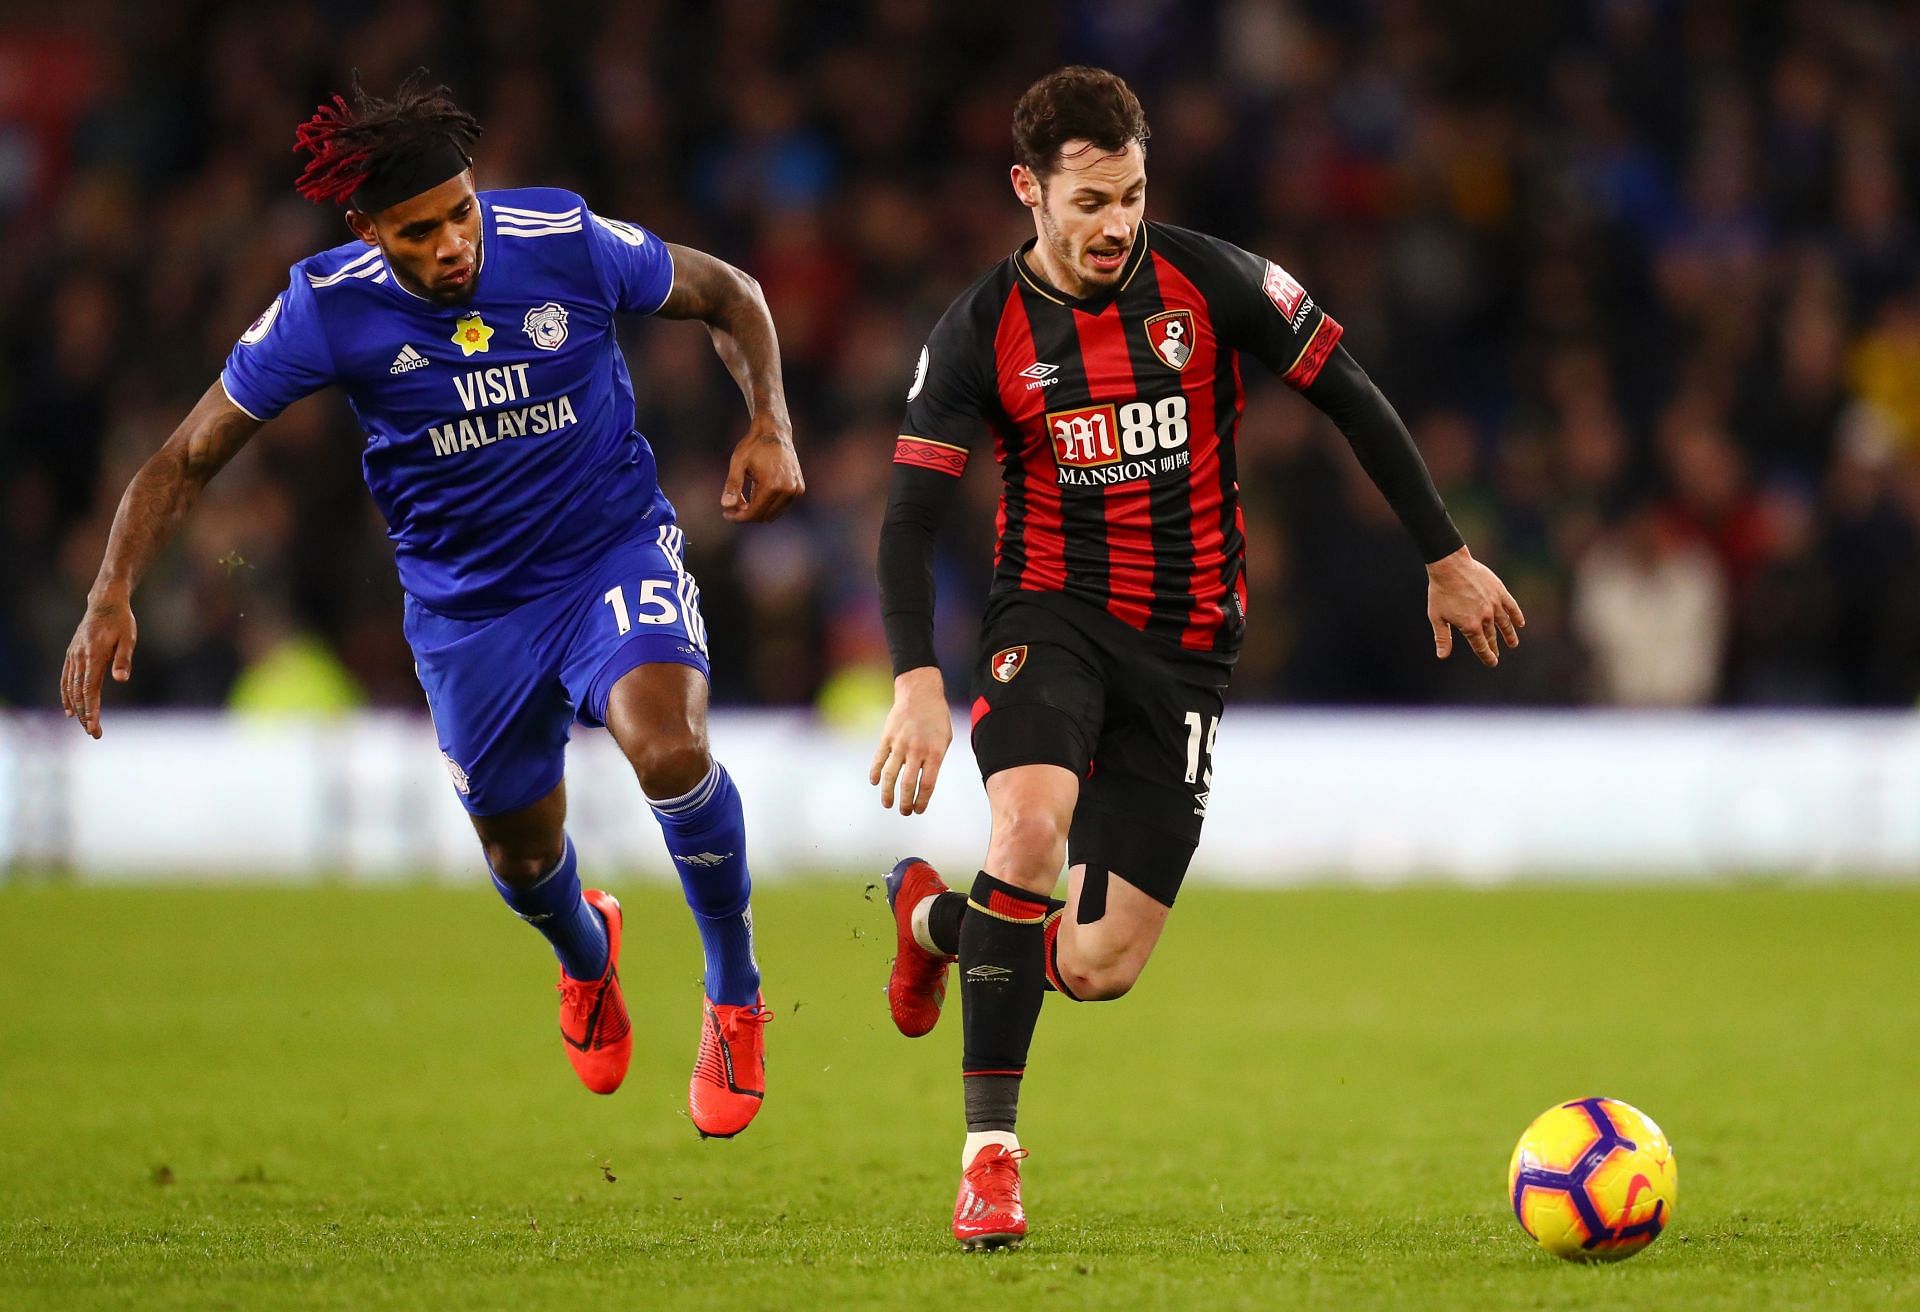 Bournemouth play host to Cardiff City at the Vitality Stadium